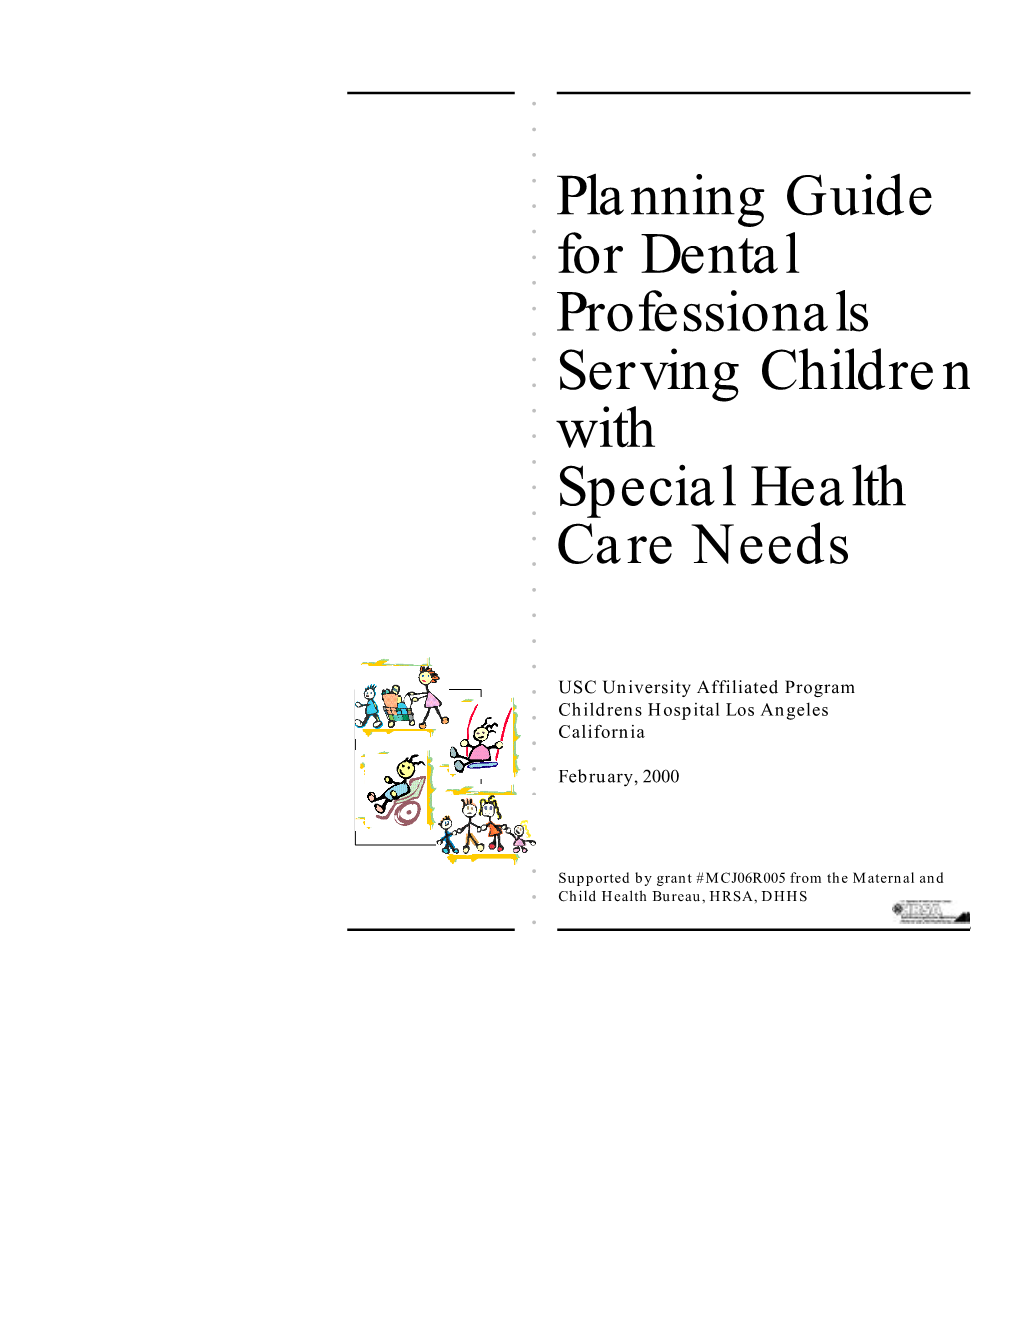 Planning Guide for Dental Professionals Serving Children with Special Health Care Needs